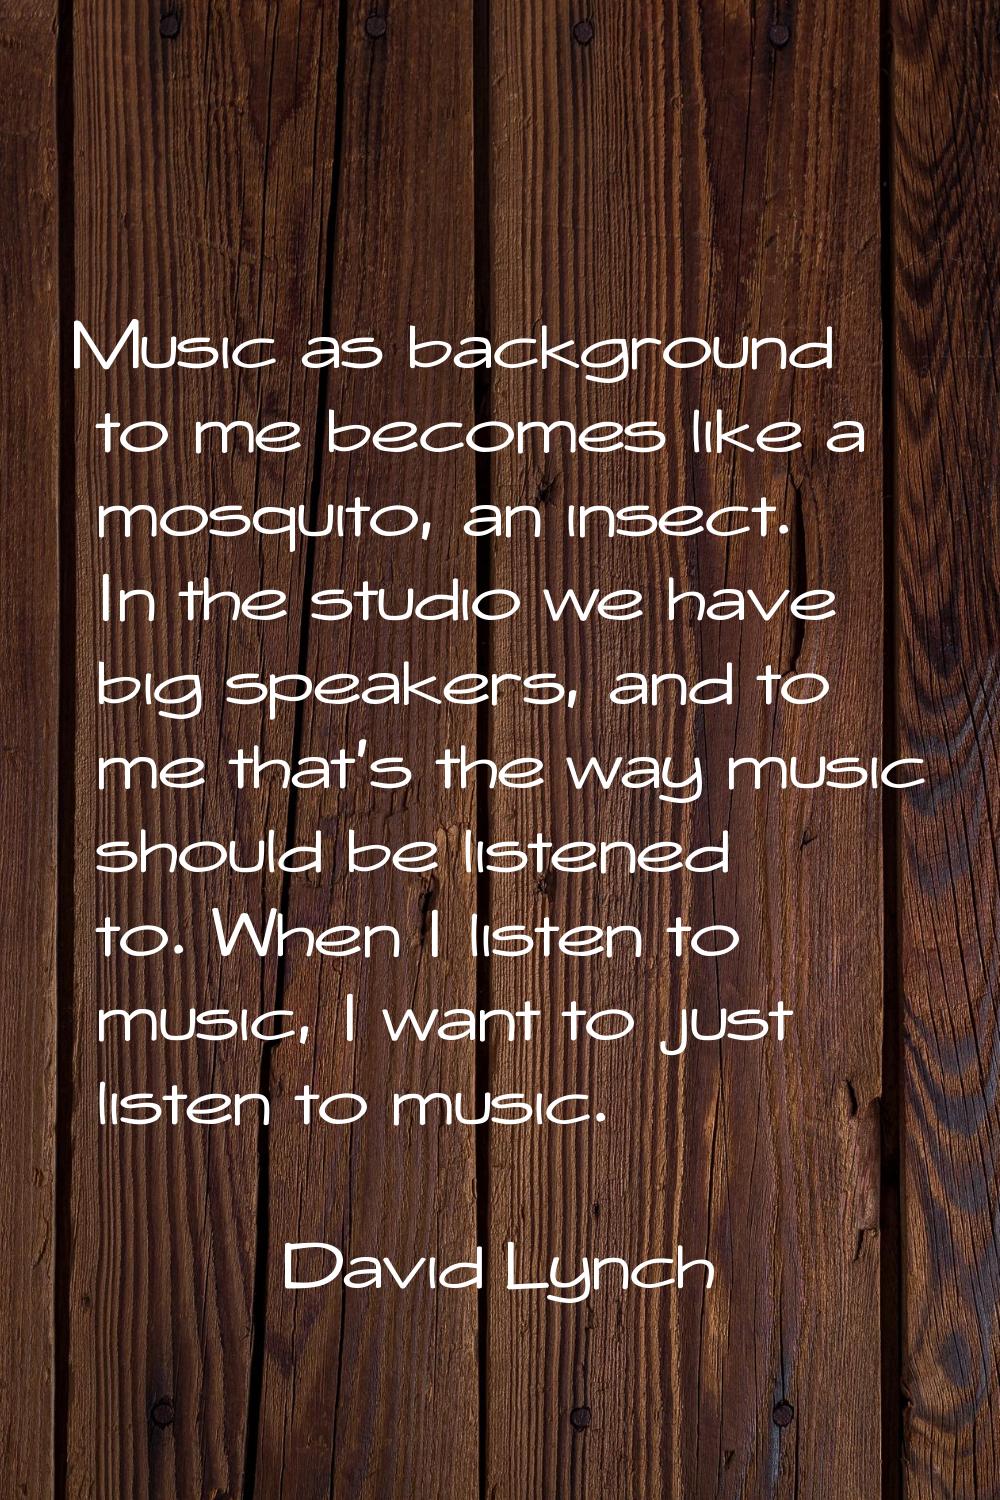 Music as background to me becomes like a mosquito, an insect. In the studio we have big speakers, a